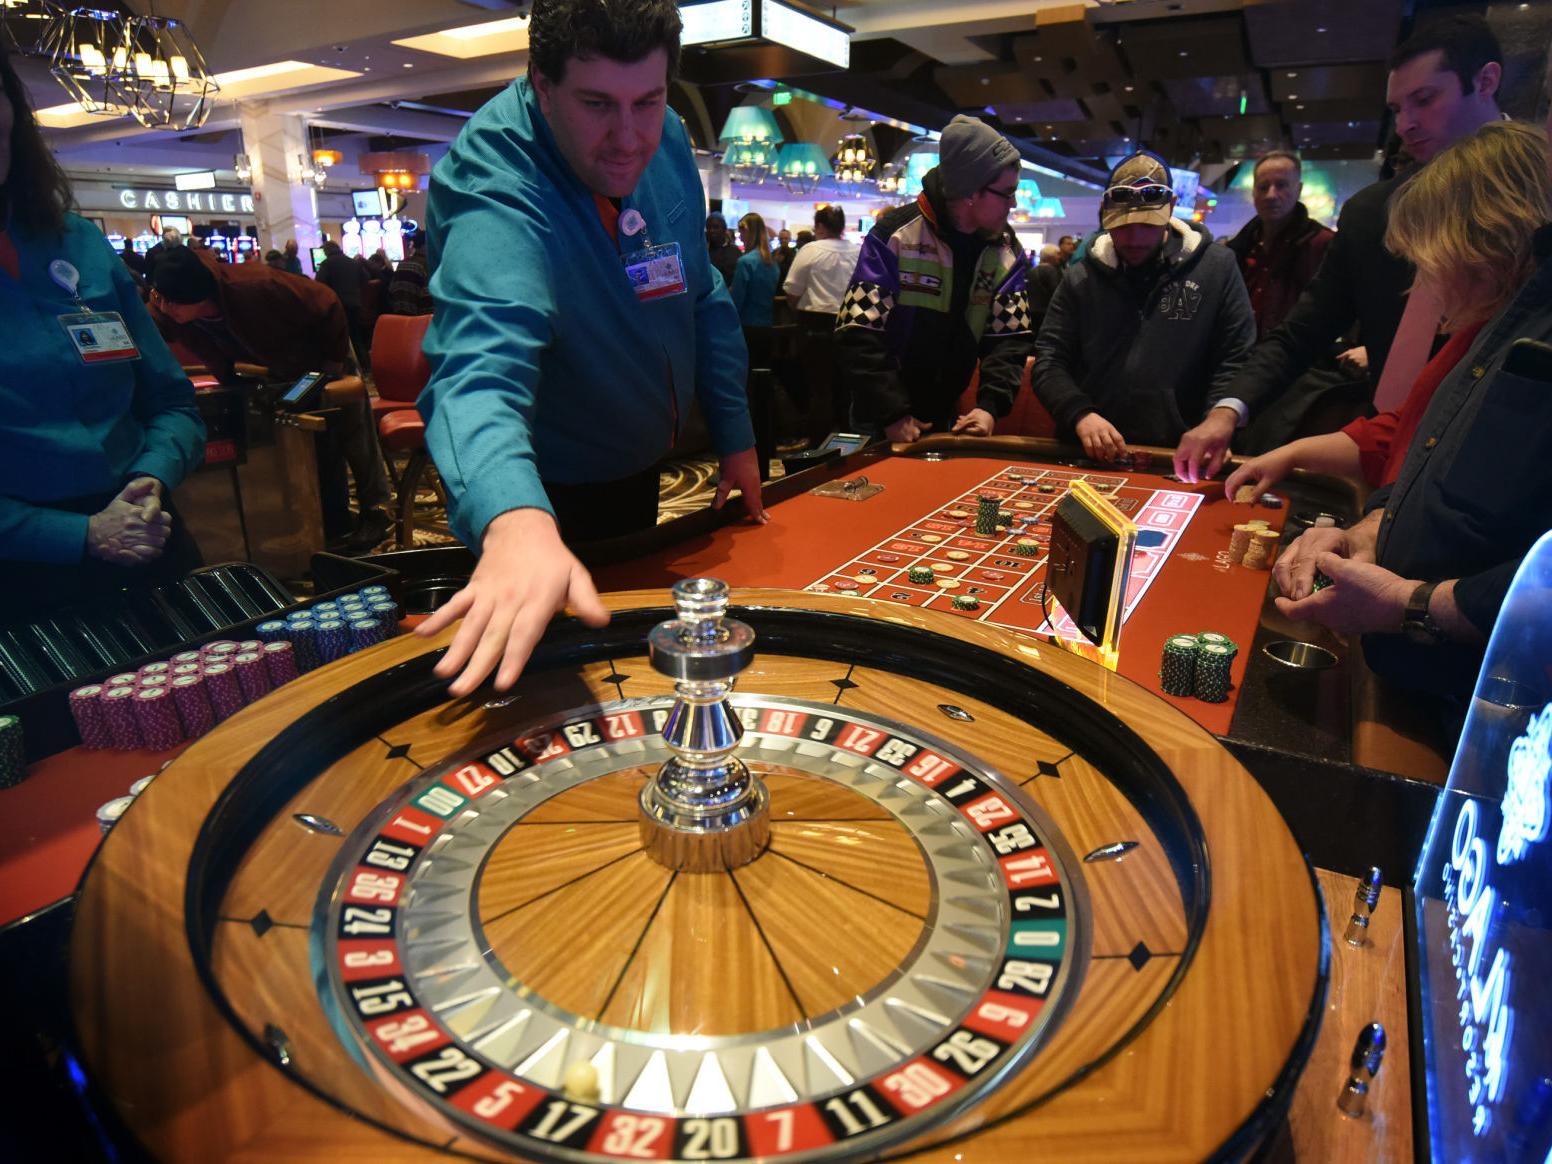 We are essential': Workers urge Cuomo to allow NY casinos to reopen |  Politics | auburnpub.com